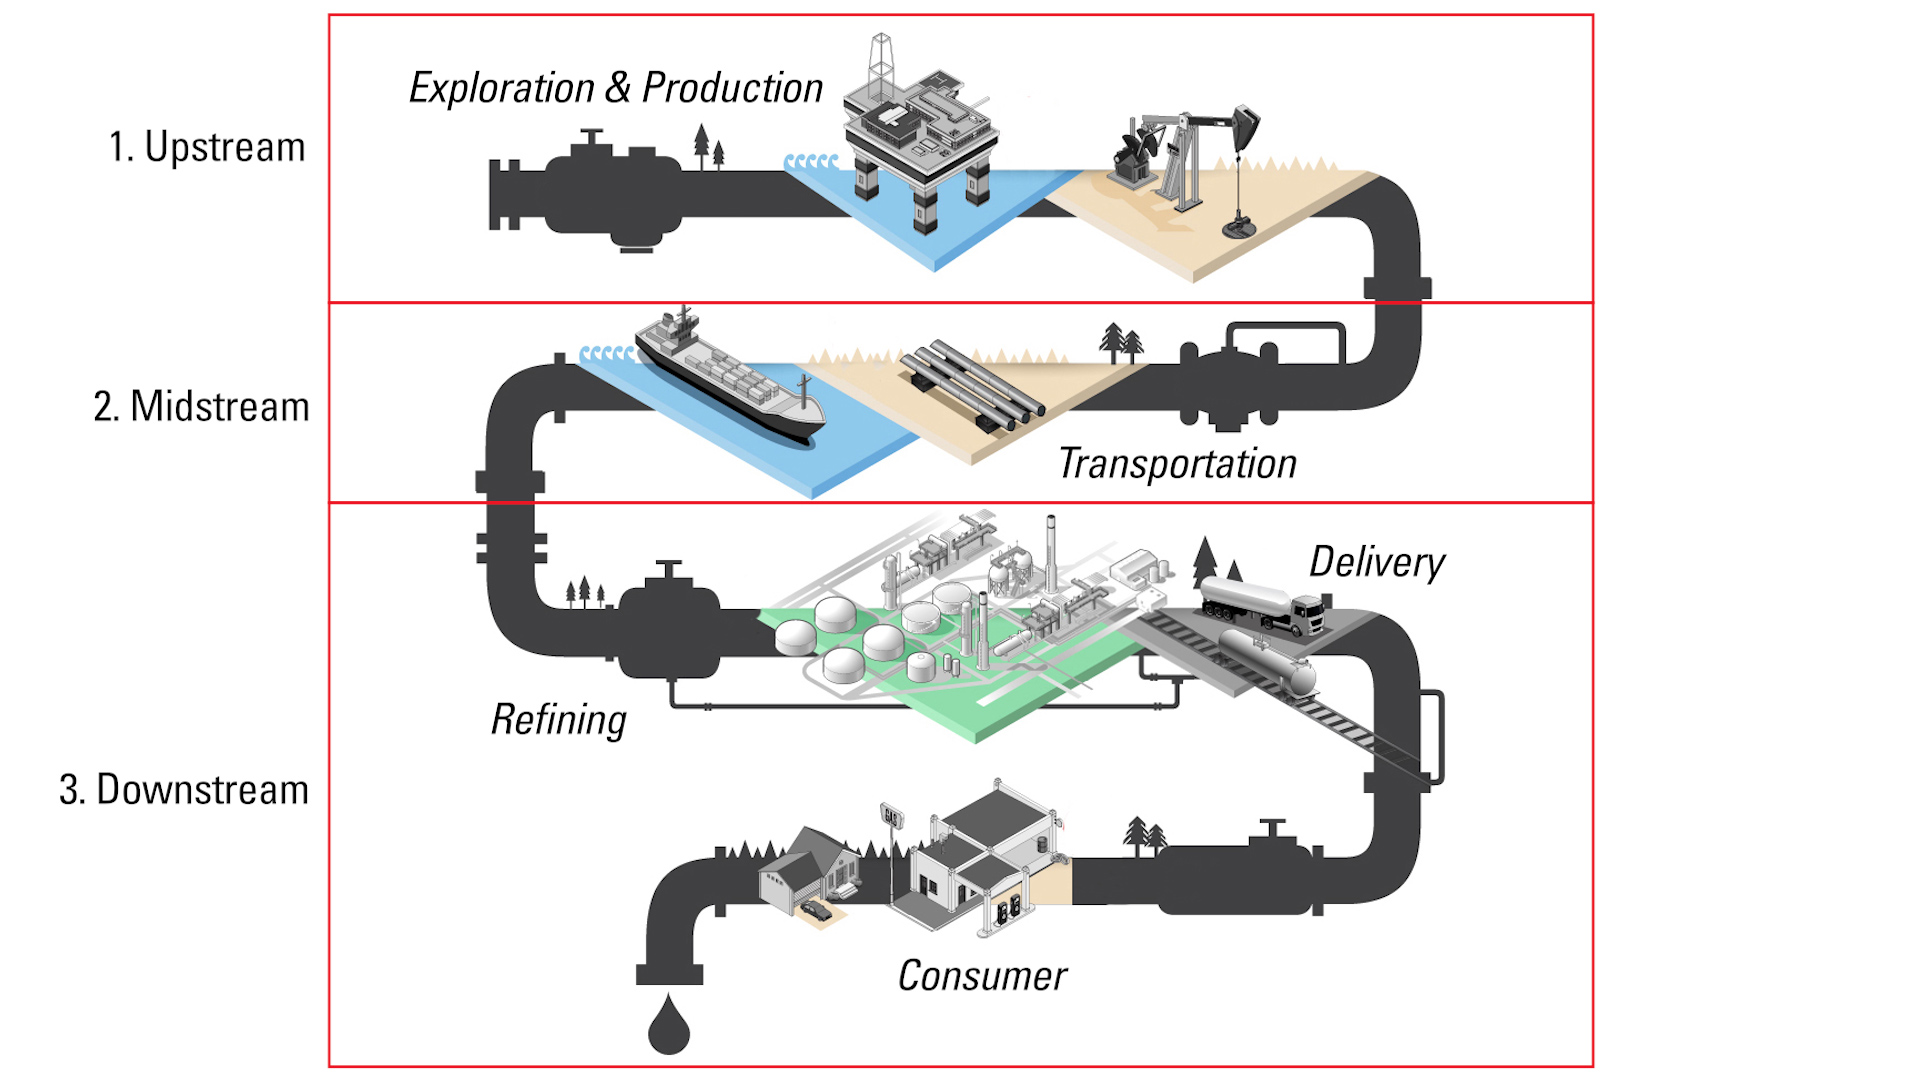 3 Sectors of Oil and Gas: Upstream, Midstream, and Downstream